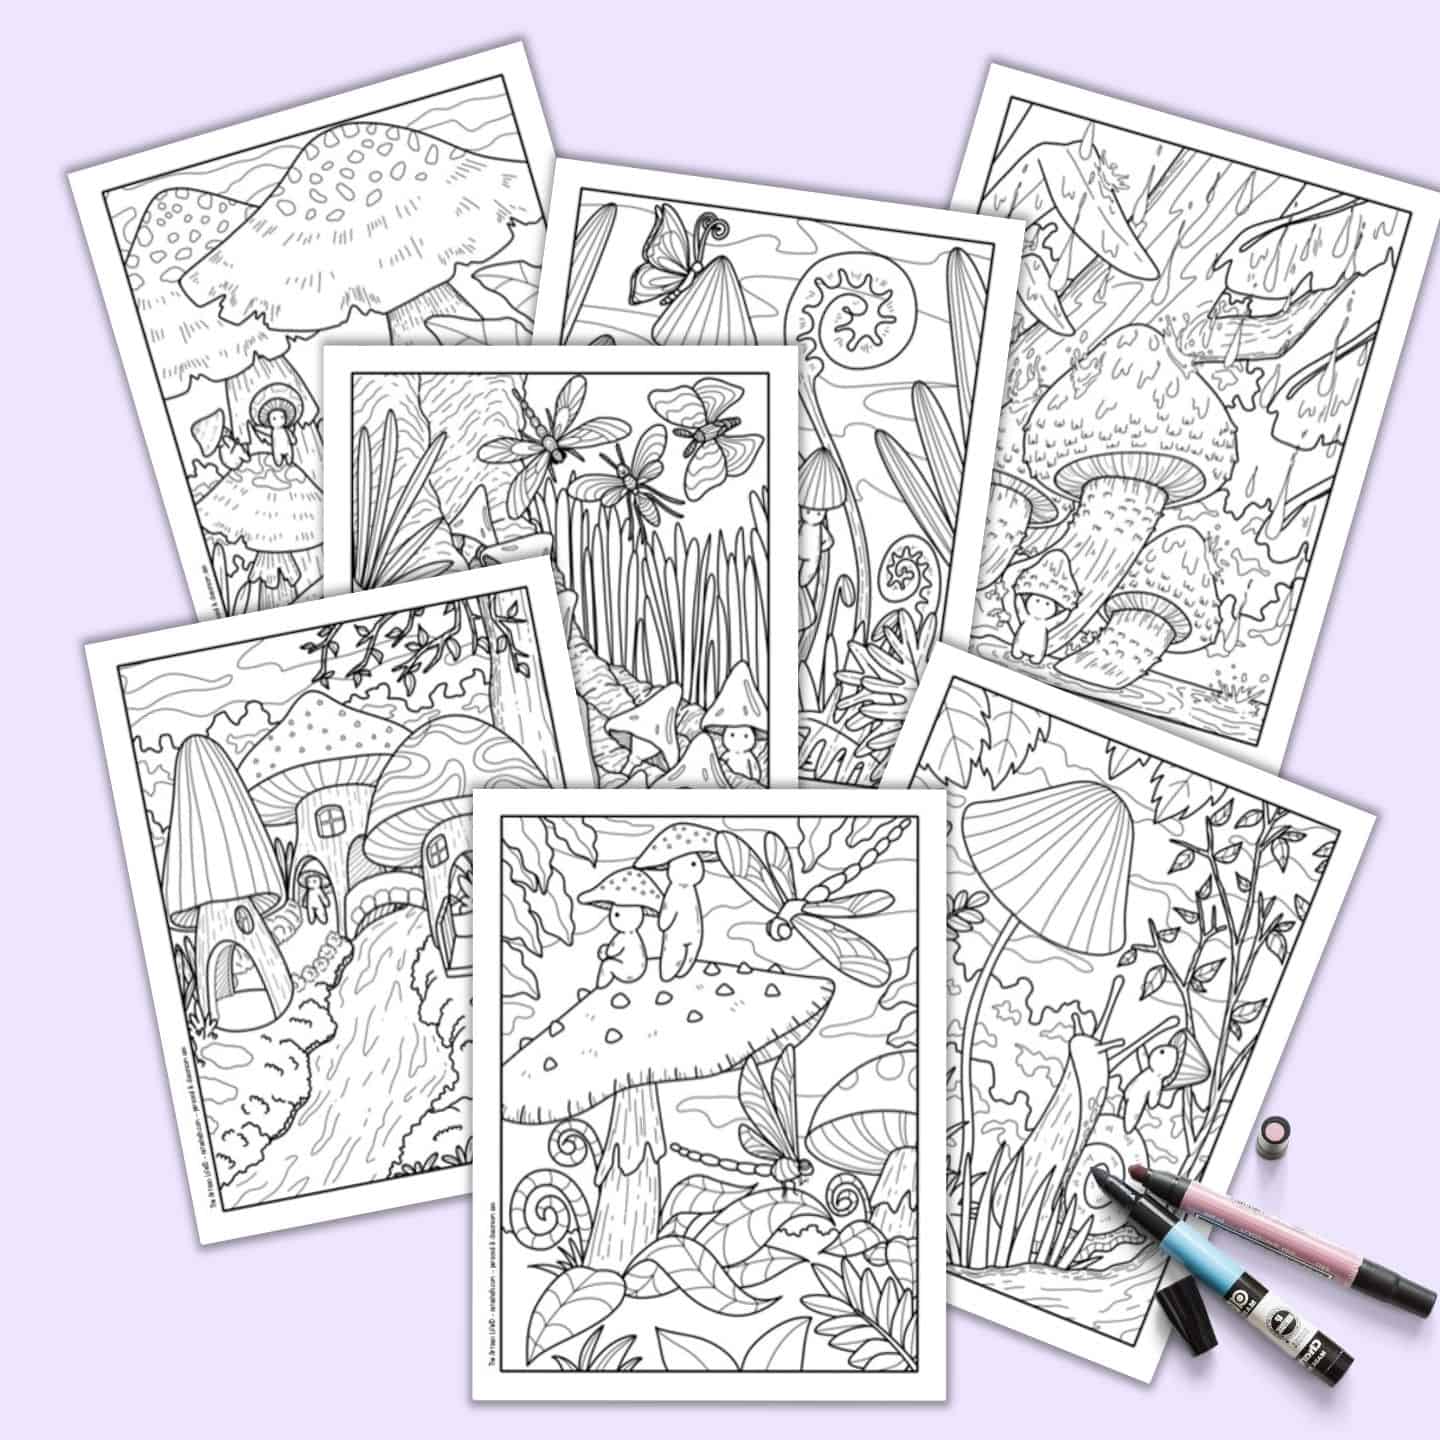 Free Printable Cute Forest Mushroom Coloring Pages   The Artisan Life